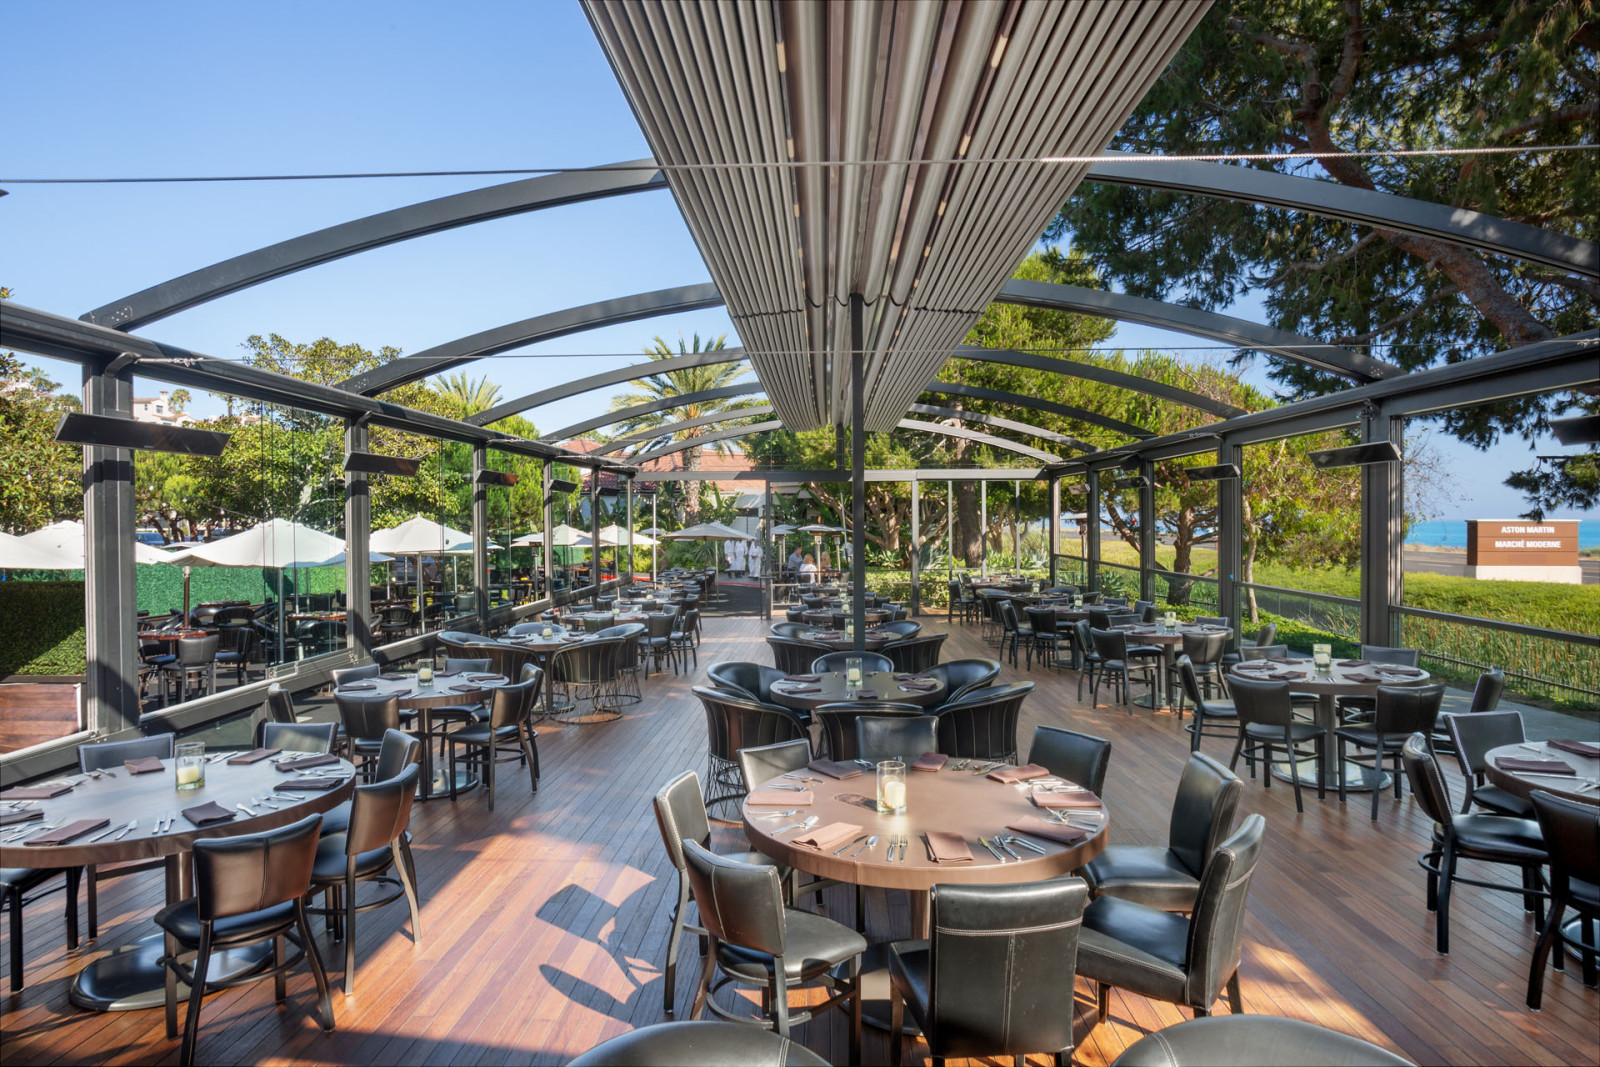 Palmiye’s Touch: Enhancing California’s Cafe with Pergola & Glass Systems